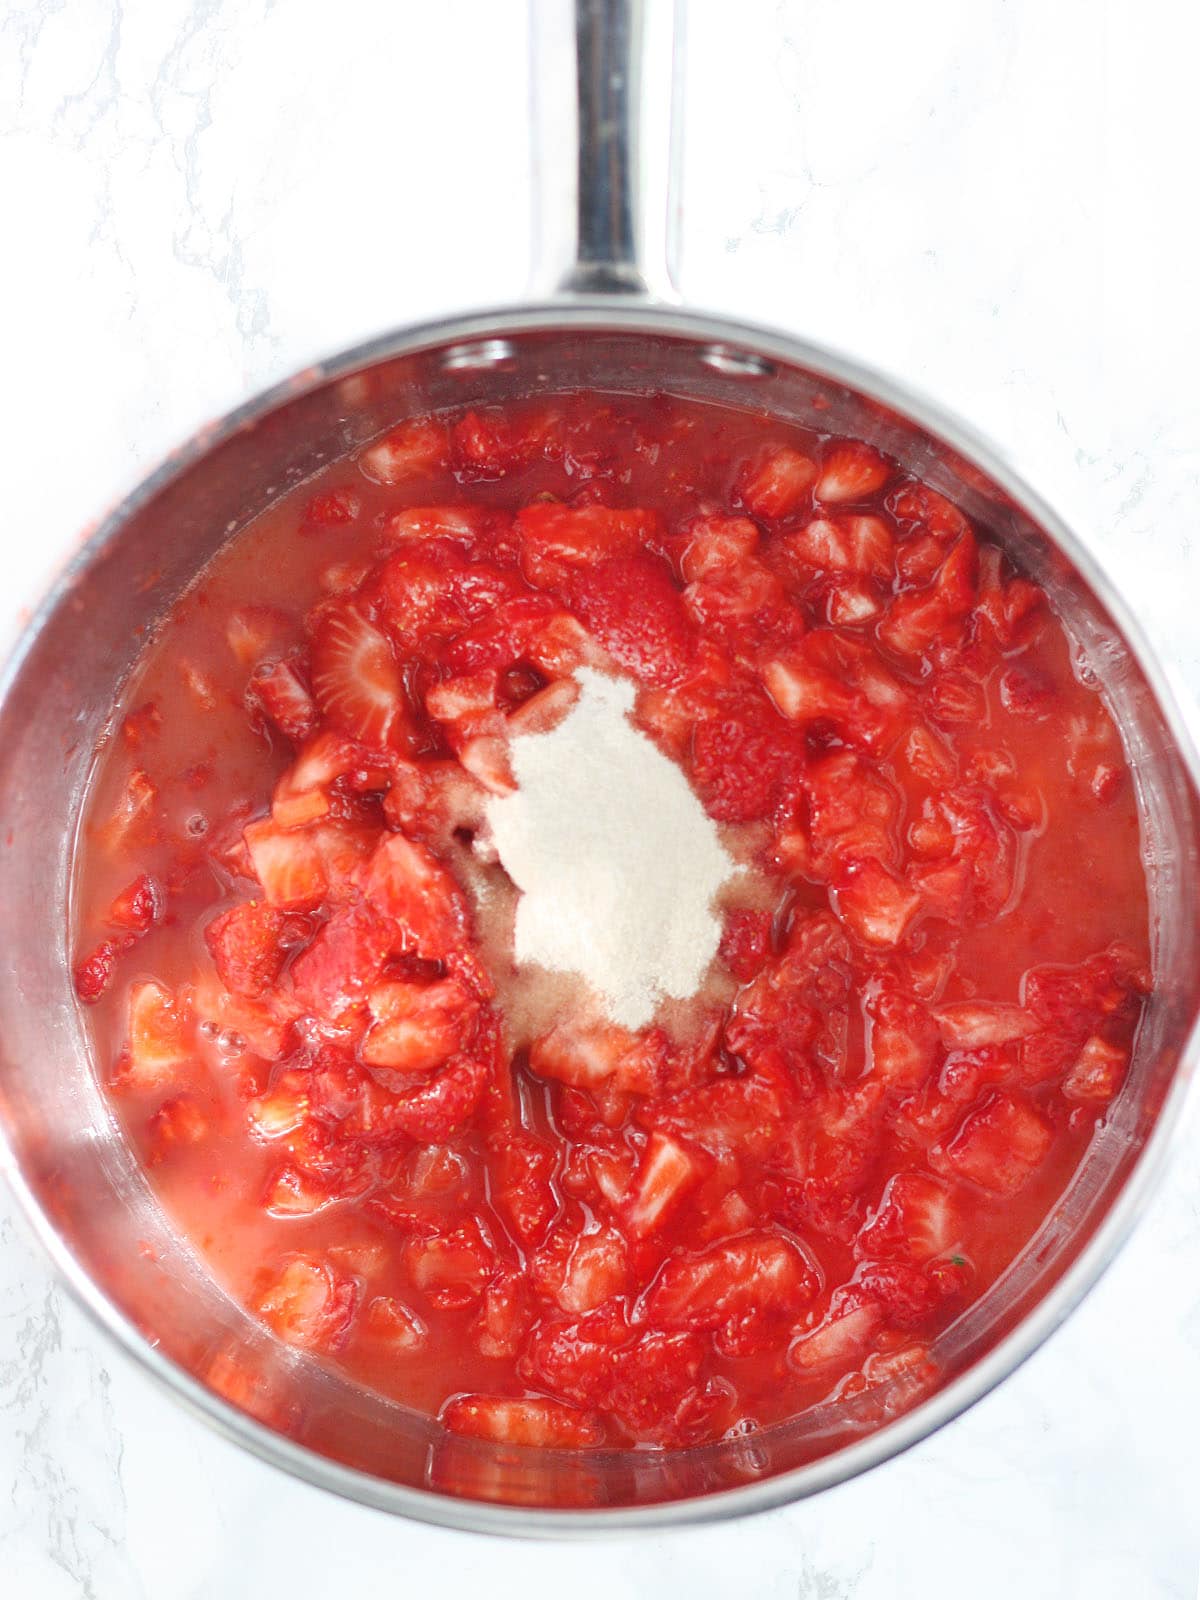 Mashed strawberries with lemon juice and pectin in a stainless steel saucepan.